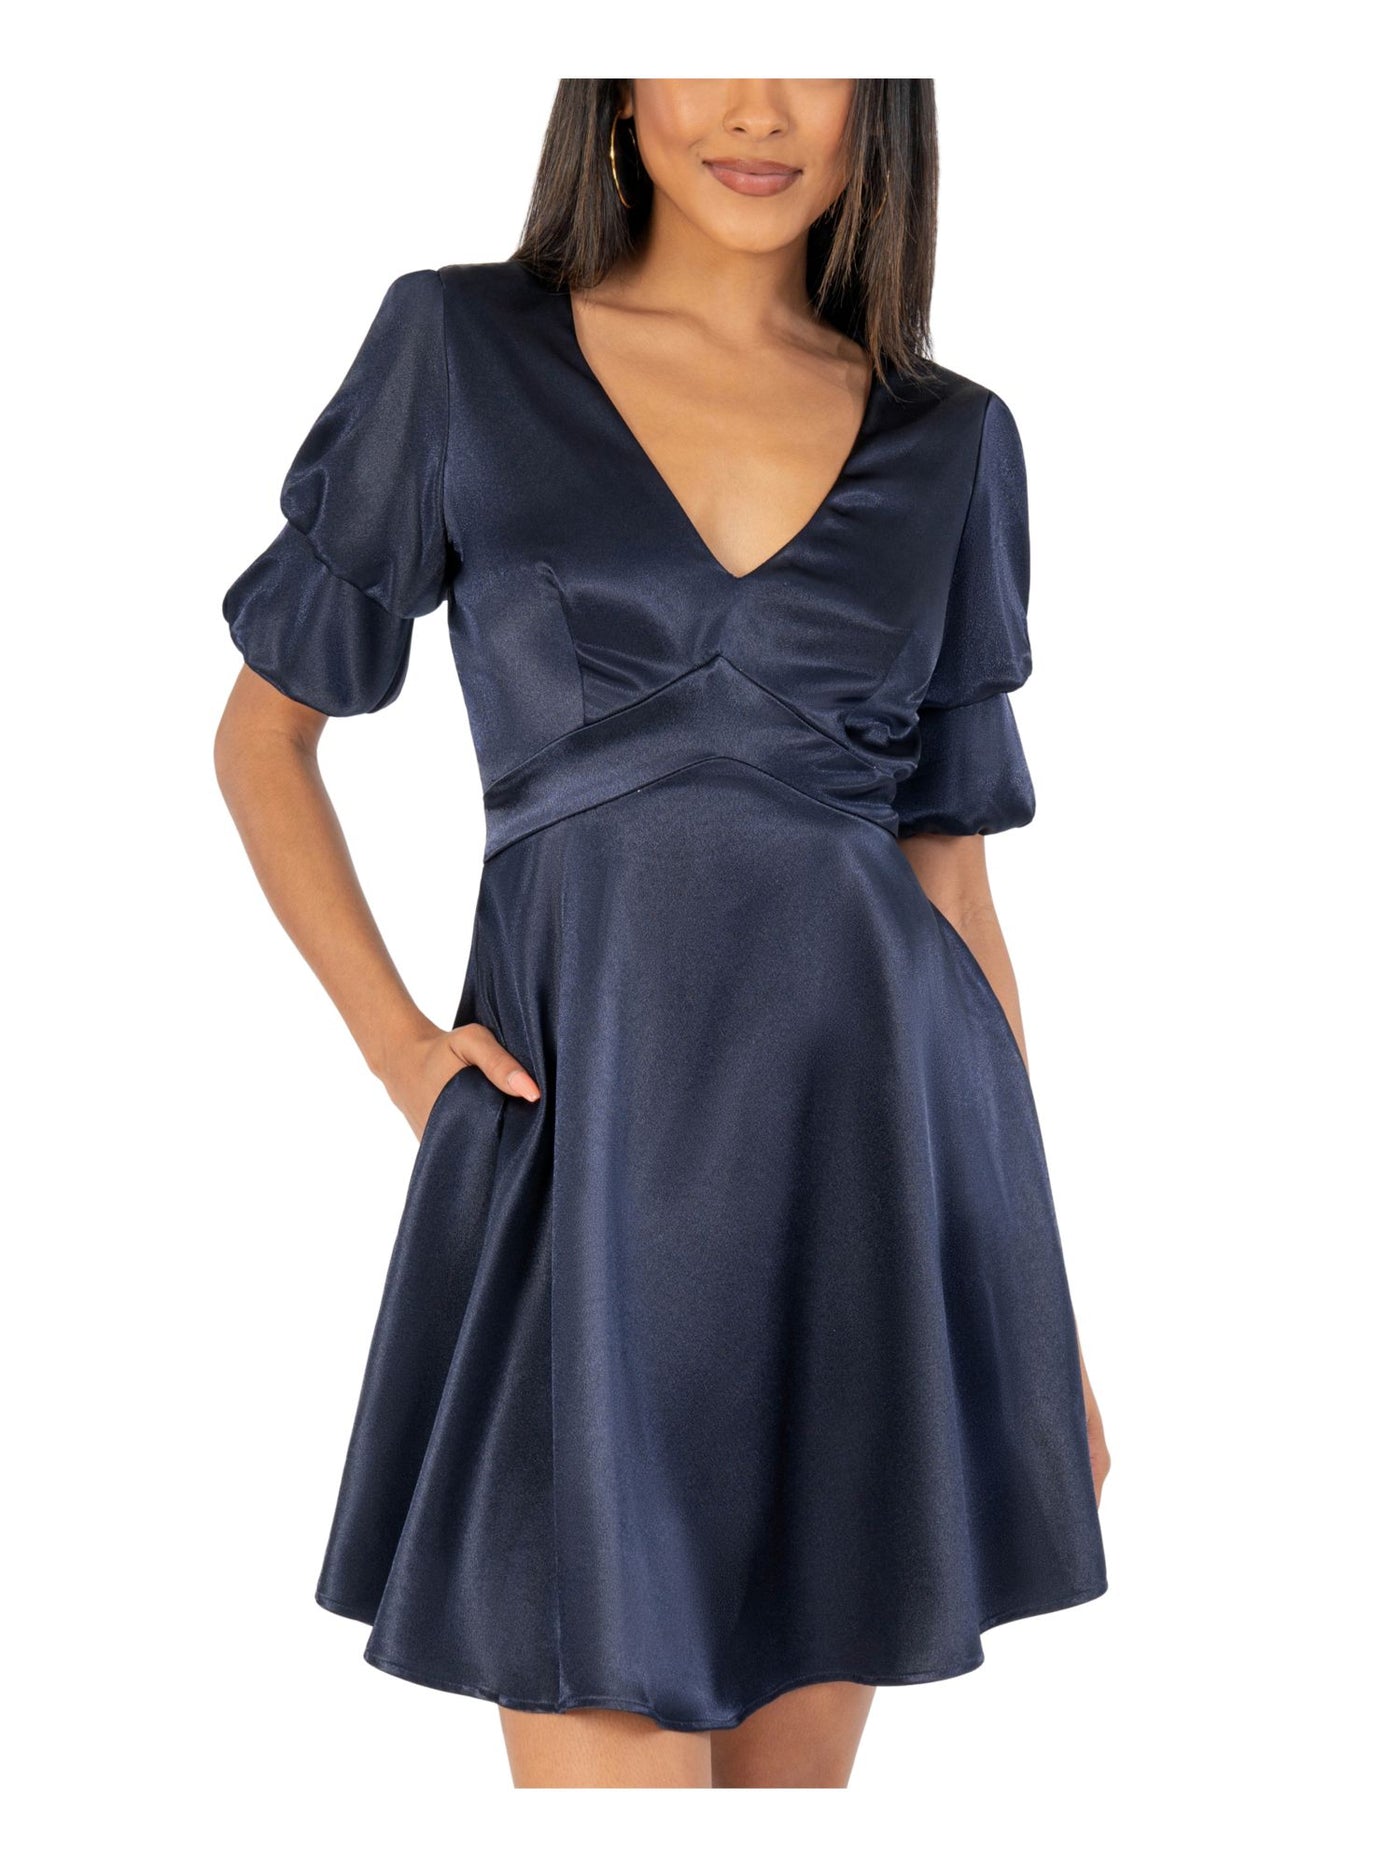 SPEECHLESS Womens Navy Pocketed Darted Satin Short Sleeve V Neck Short Party Fit + Flare Dress Juniors 11